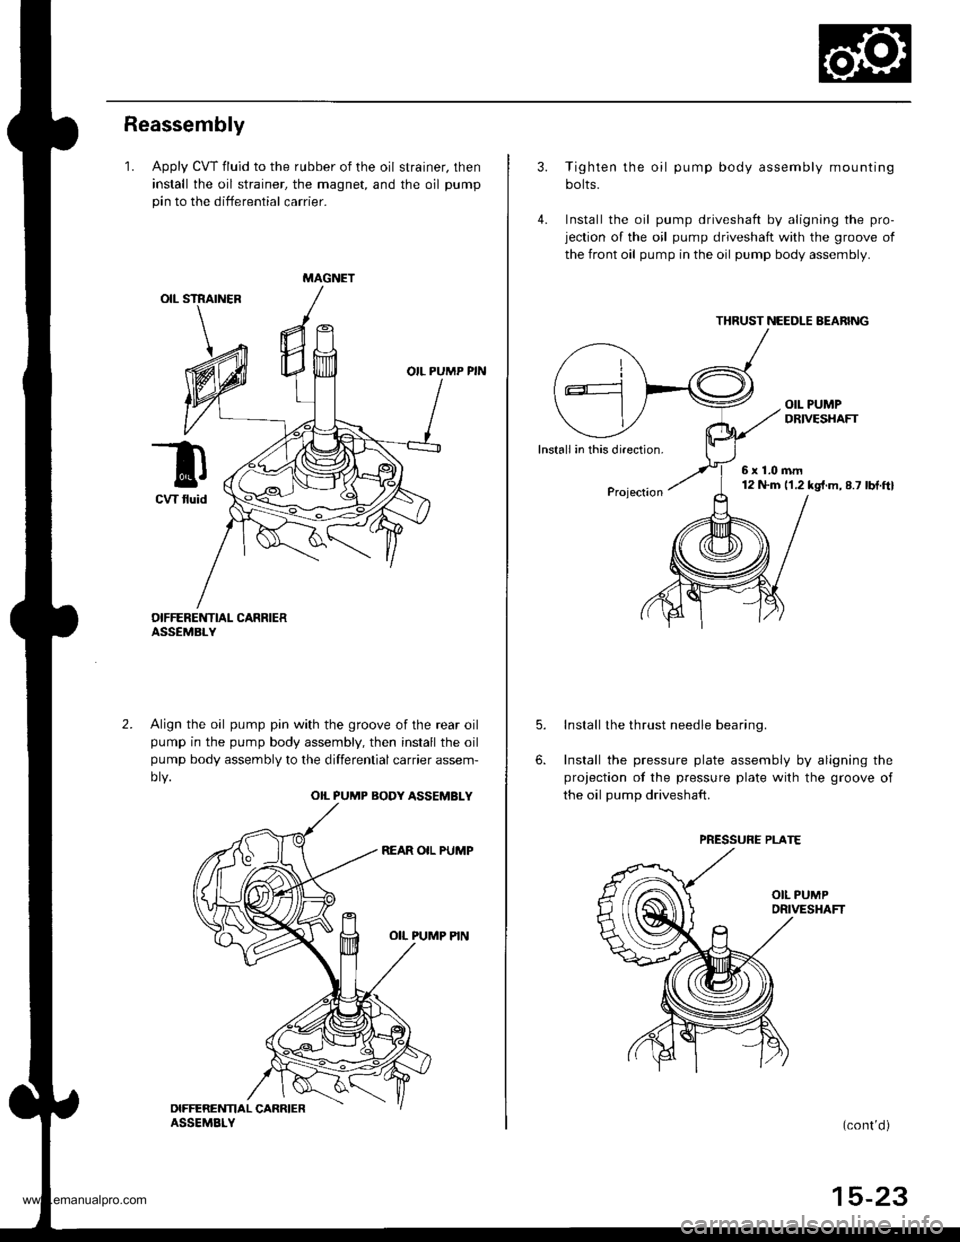 HONDA CR-V 1999 RD1-RD3 / 1.G Workshop Manual 
Reassembly
1. Apply CVT fluid to the rubber of the oil strainer, then
install the oil strainer, the magnet, and the oil pump
pin to the differential carrier.
OIL PUMP PIN
DIFFERE]TTIAL CARRIERASSEMBL